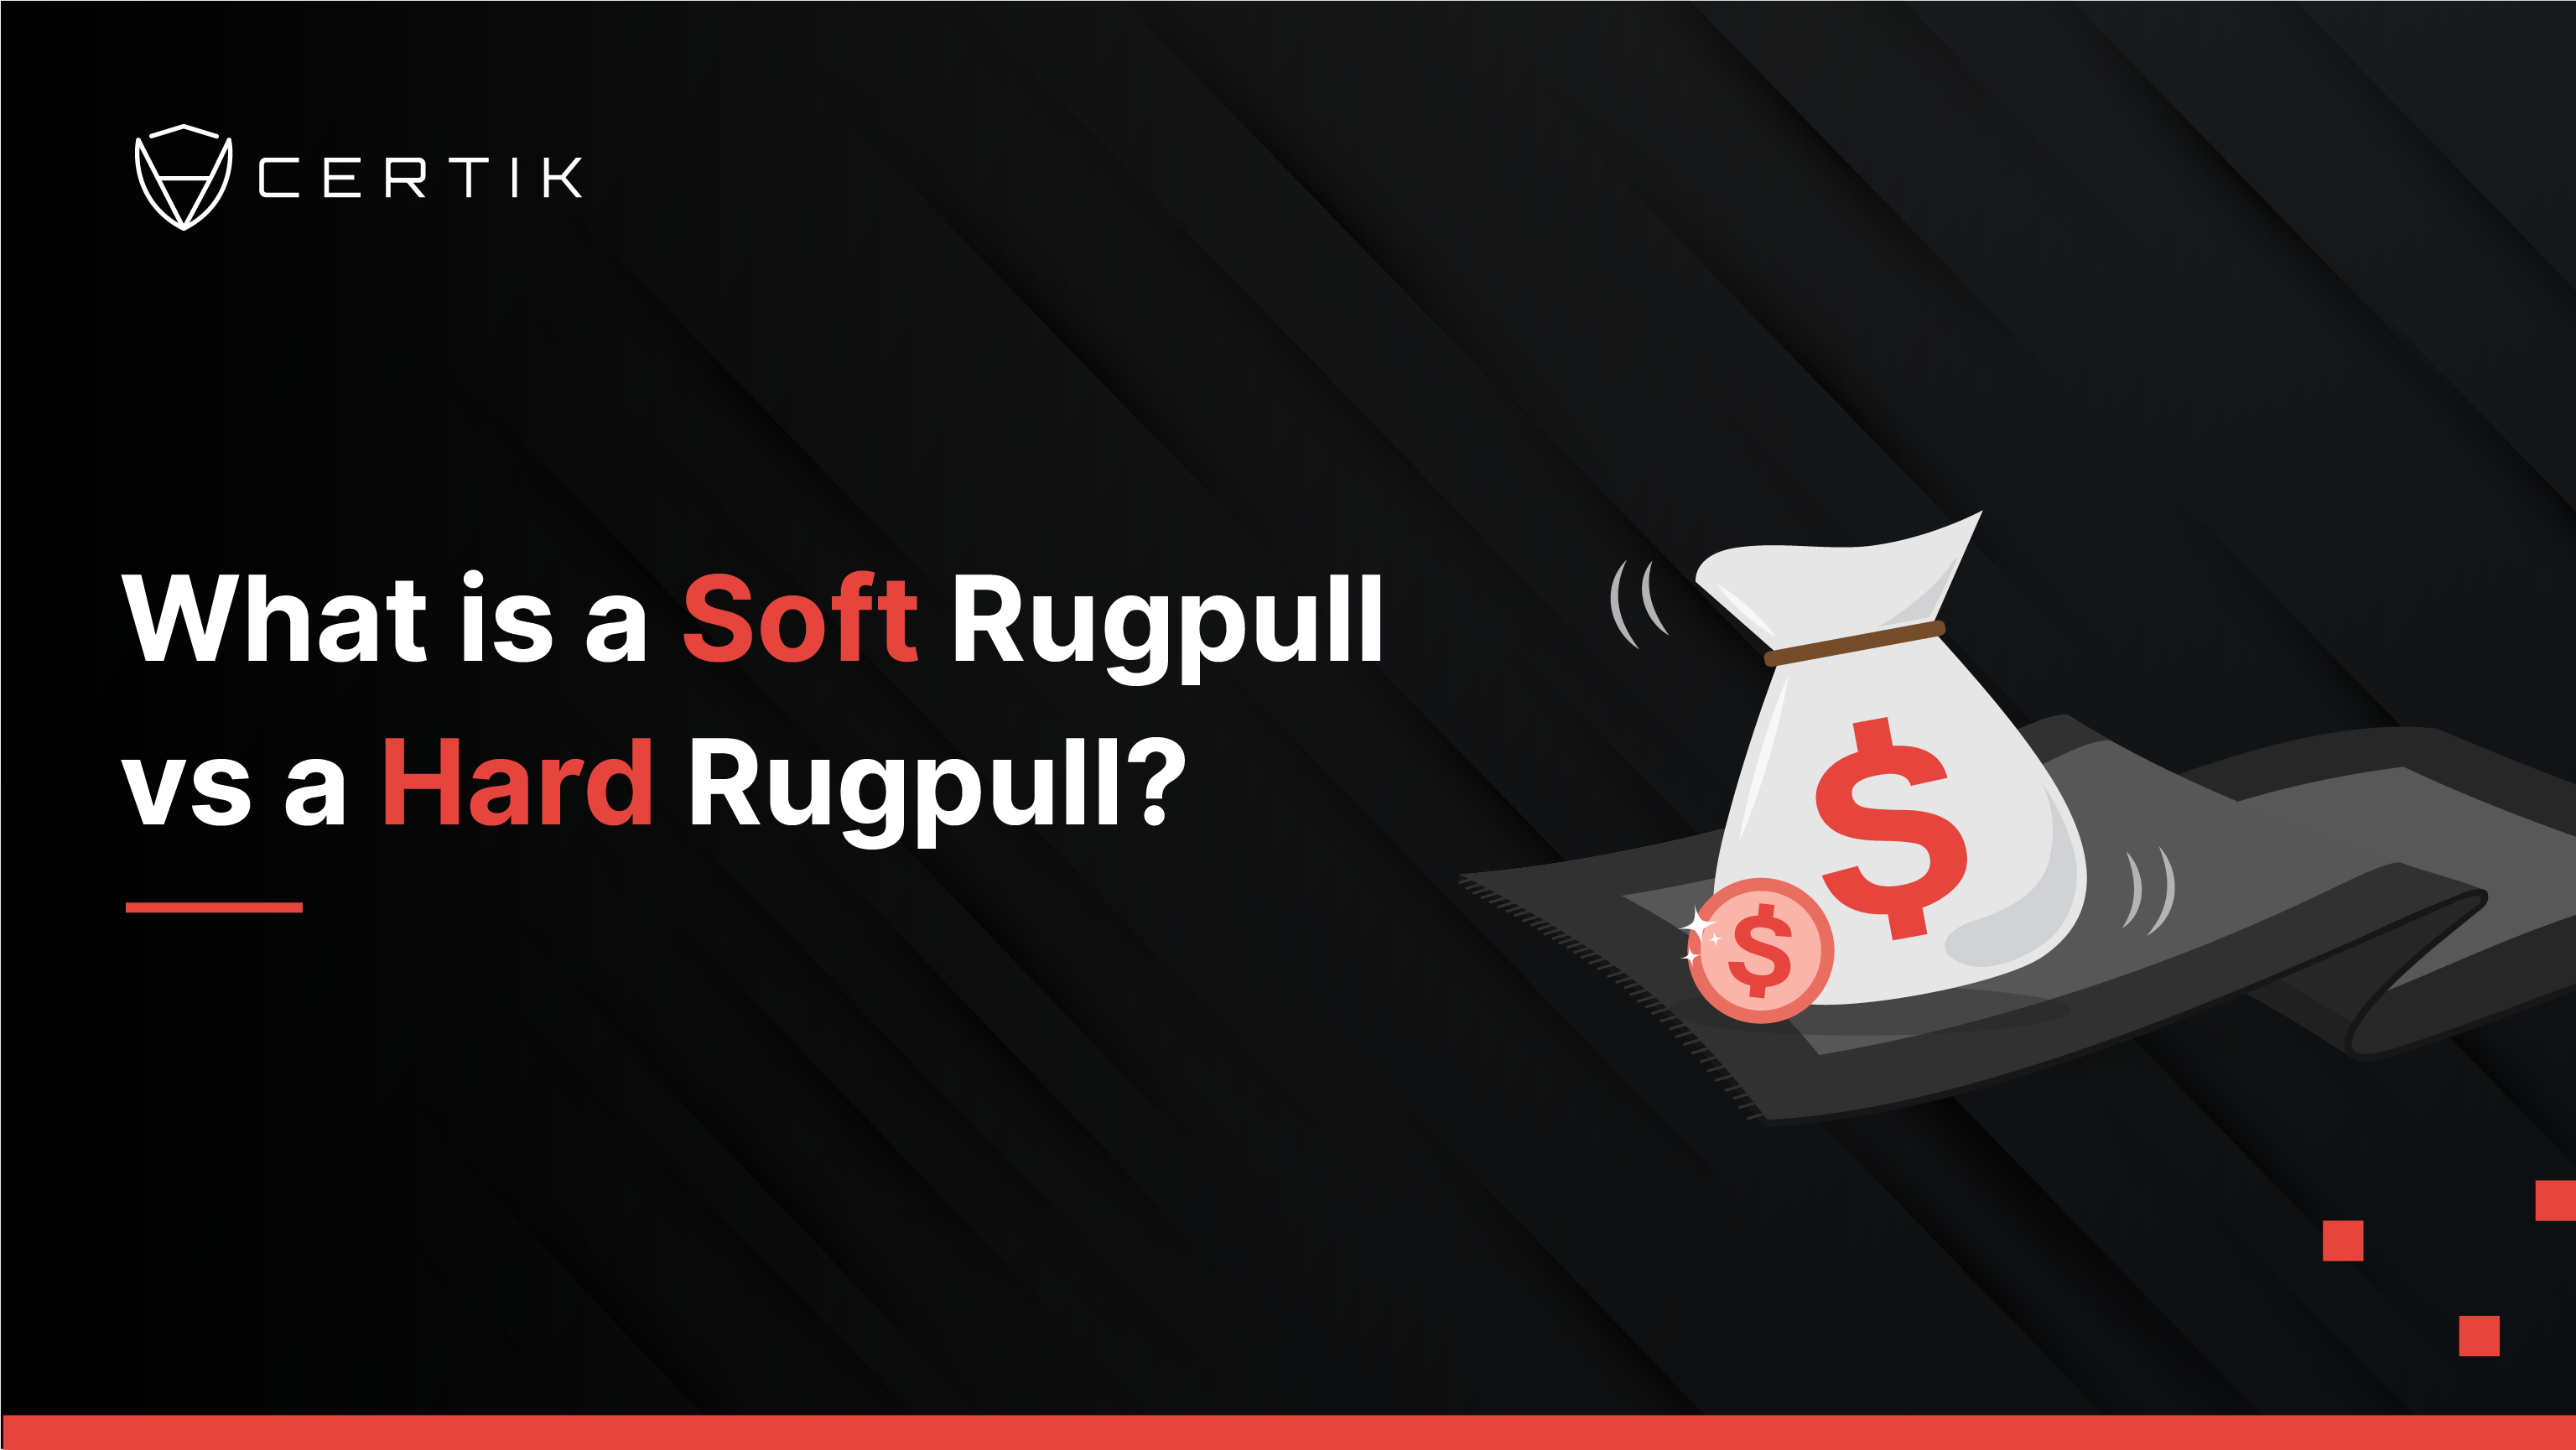 What is a Soft Rugpull vs a Hard Rugpull?